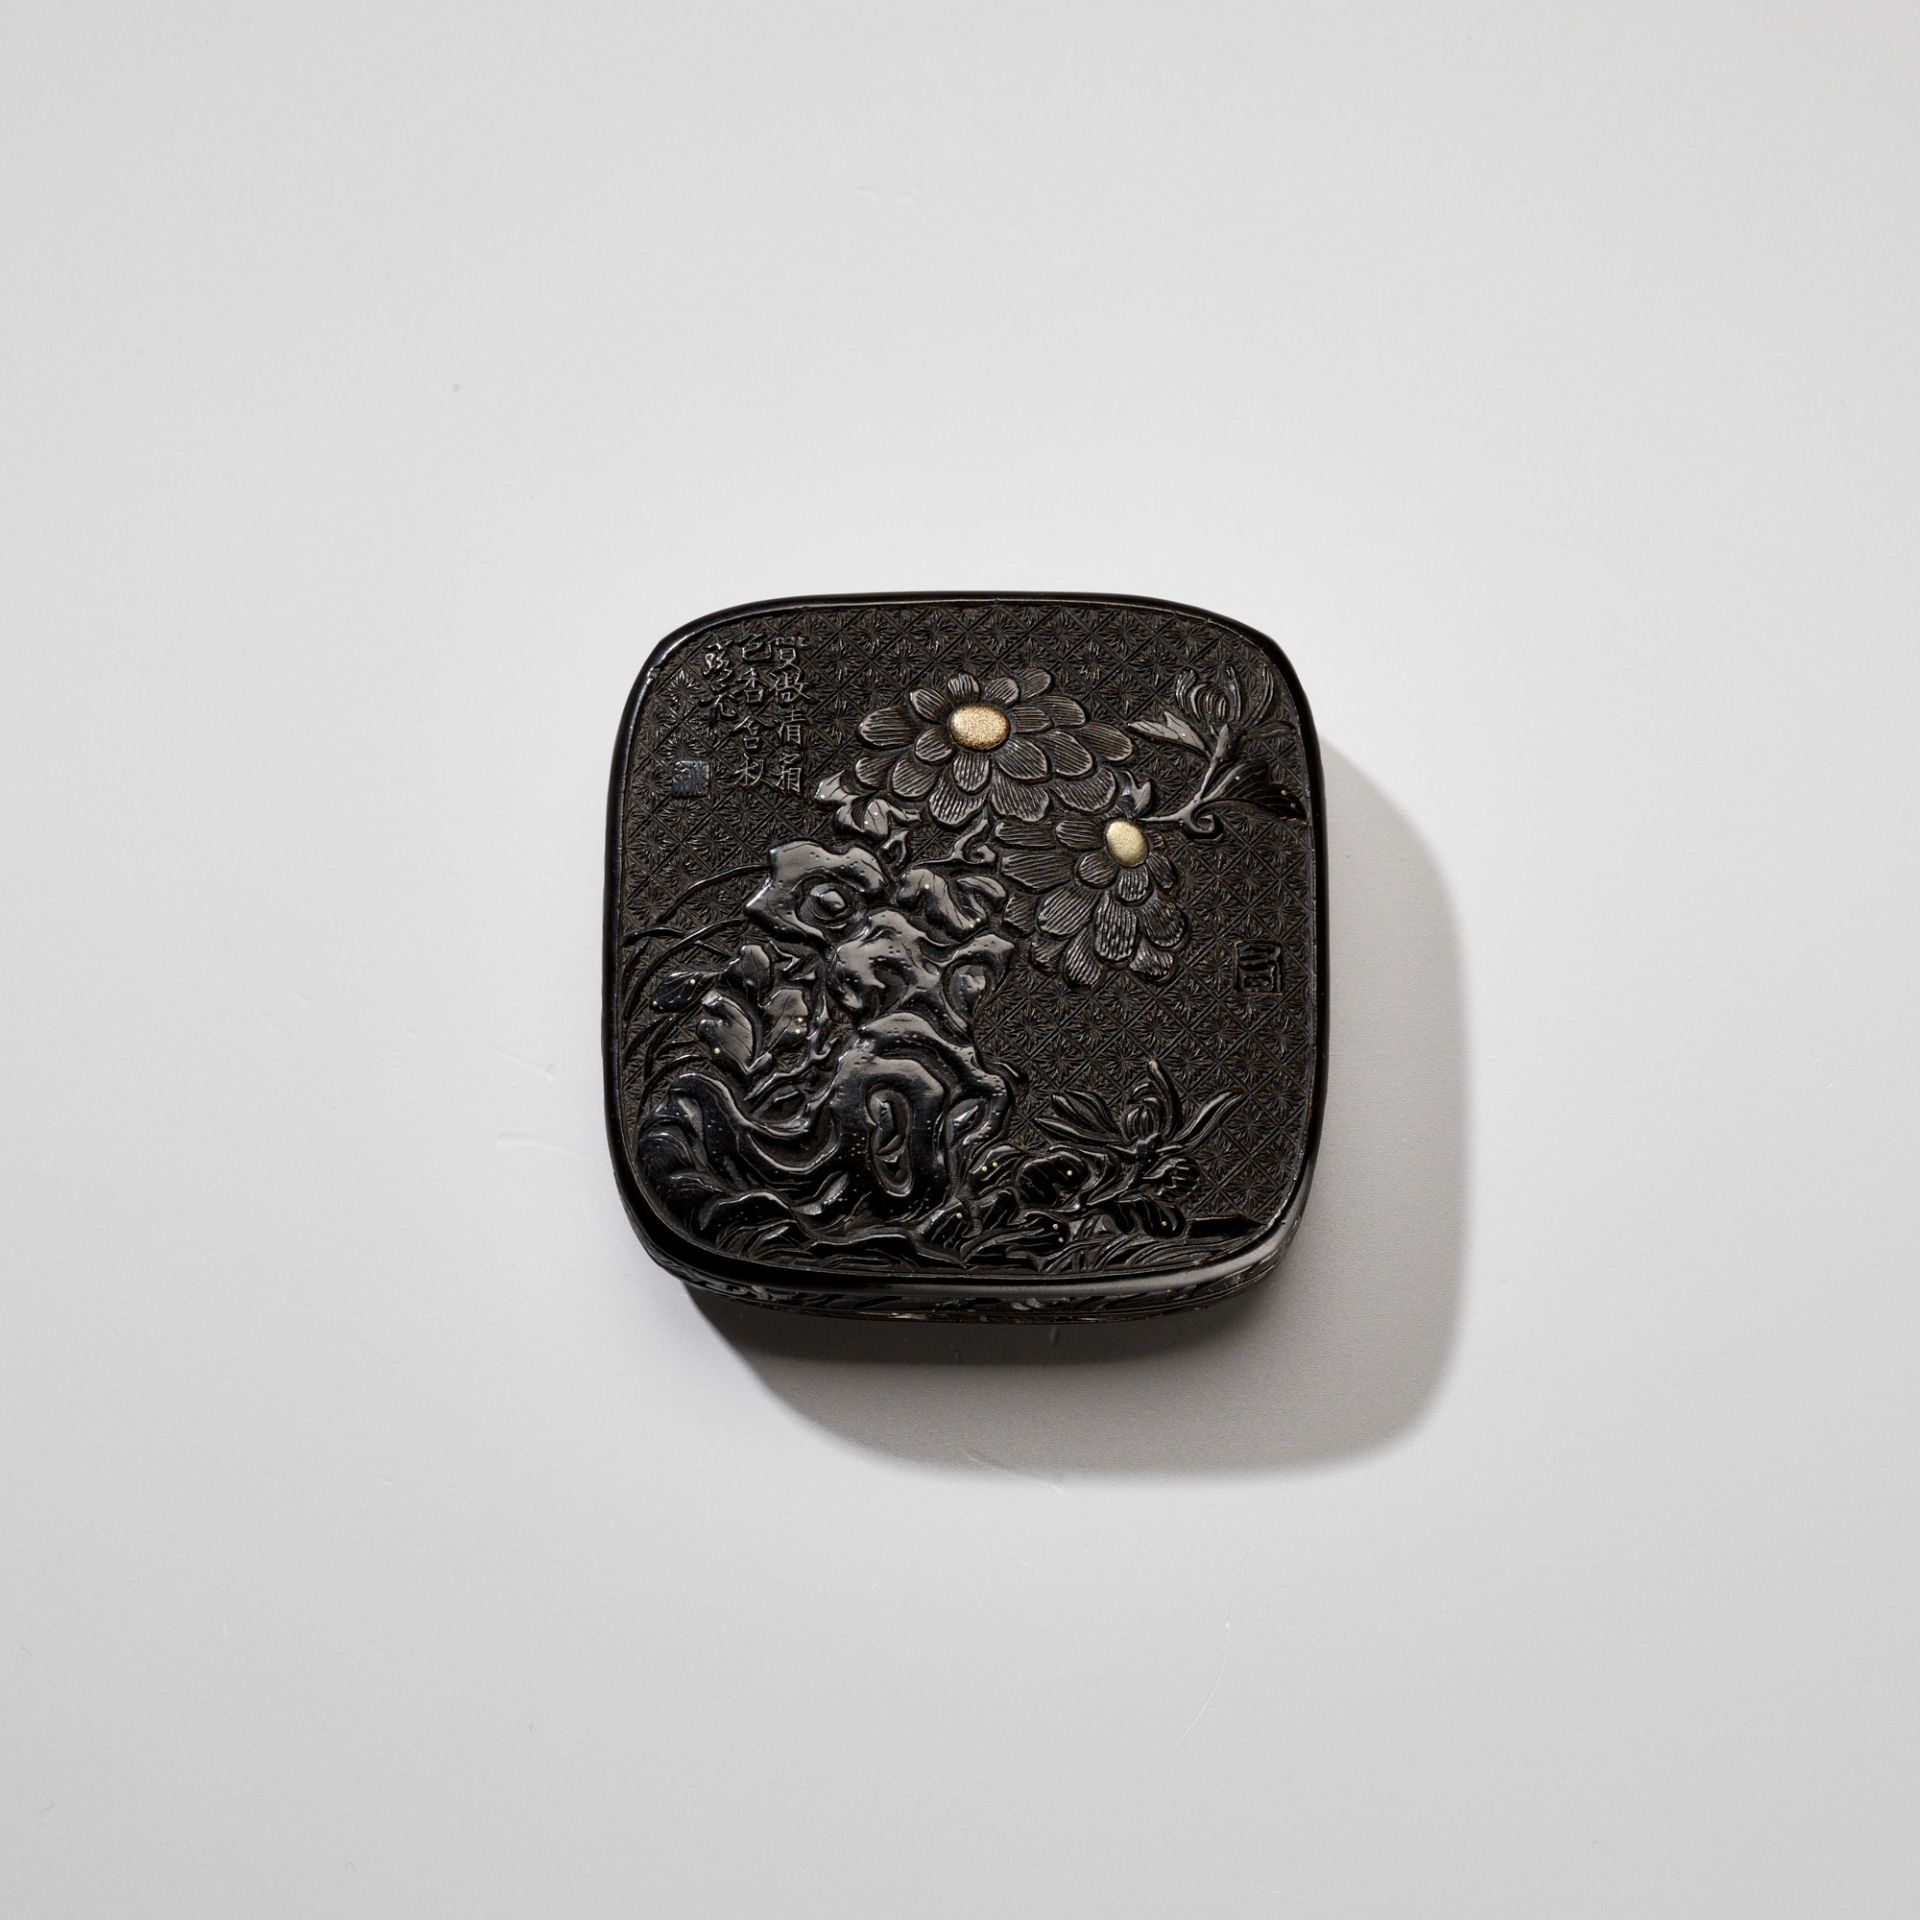 A RARE TSUIKOKU (CARVED BLACK LACQUER) KOGO (INCENSE BOX) AND COVER WITH CHRYSANTHEMUMS AND POEM